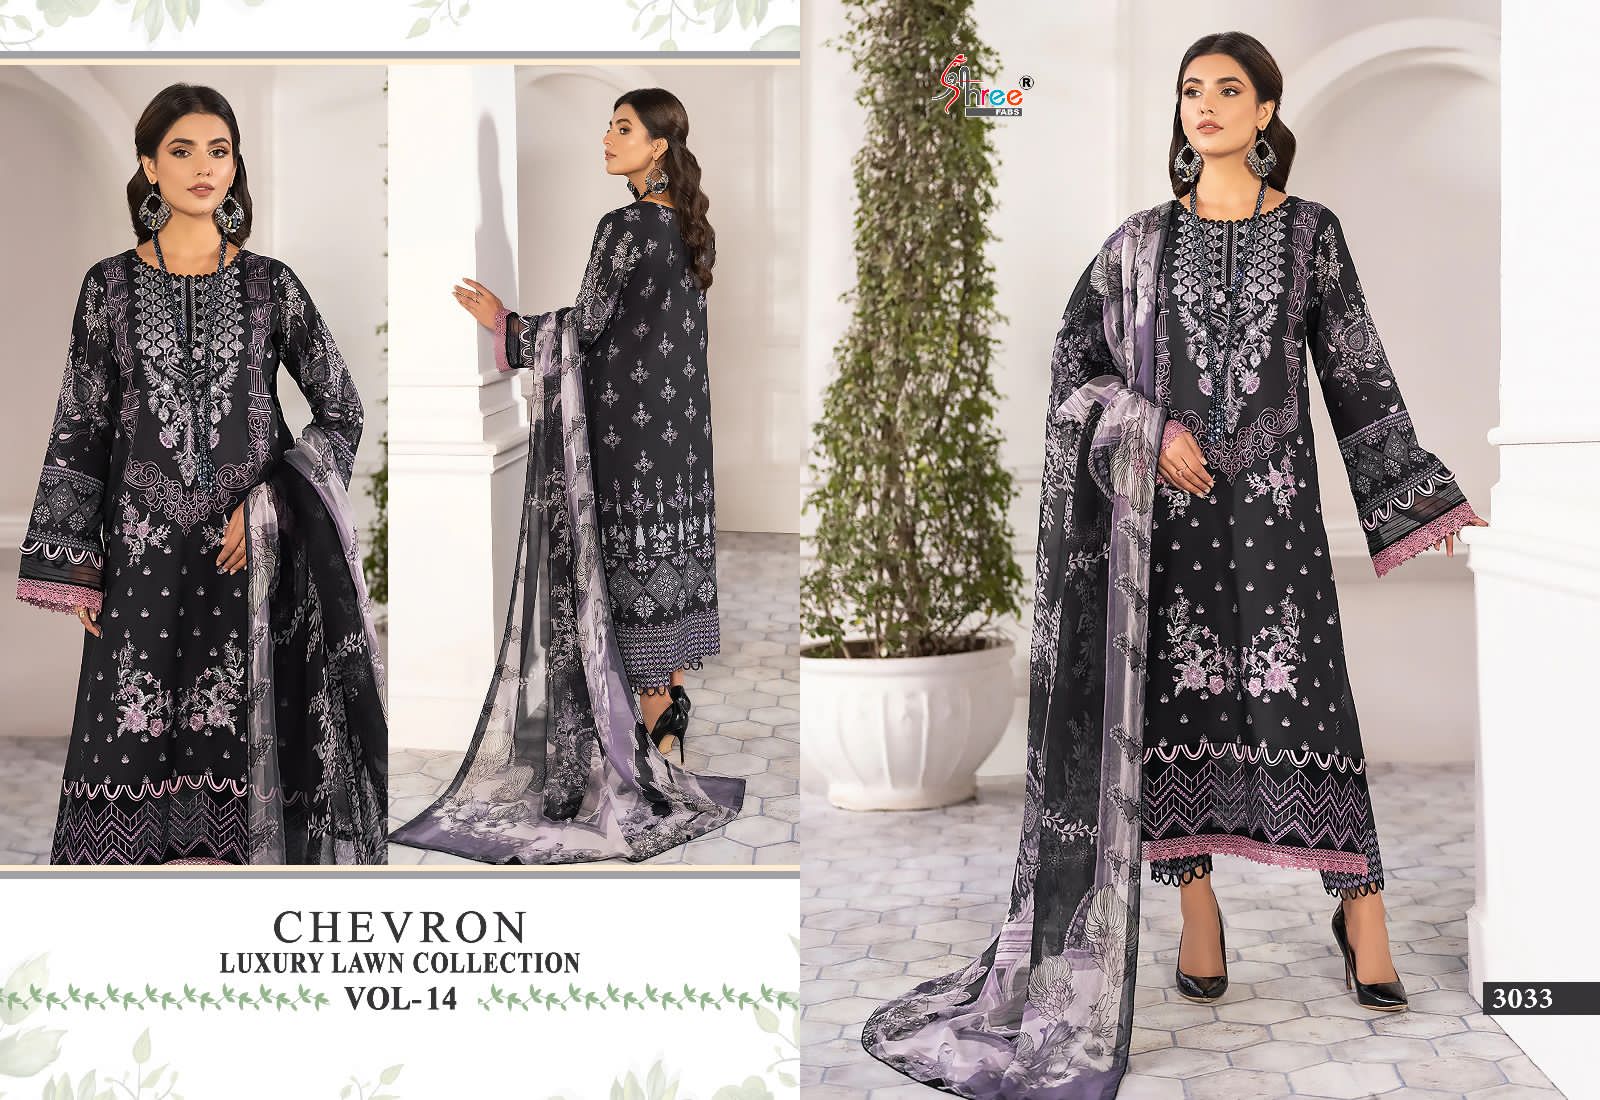 Shree Chevron Luxury Lawn Collection Vol 14 collection 2